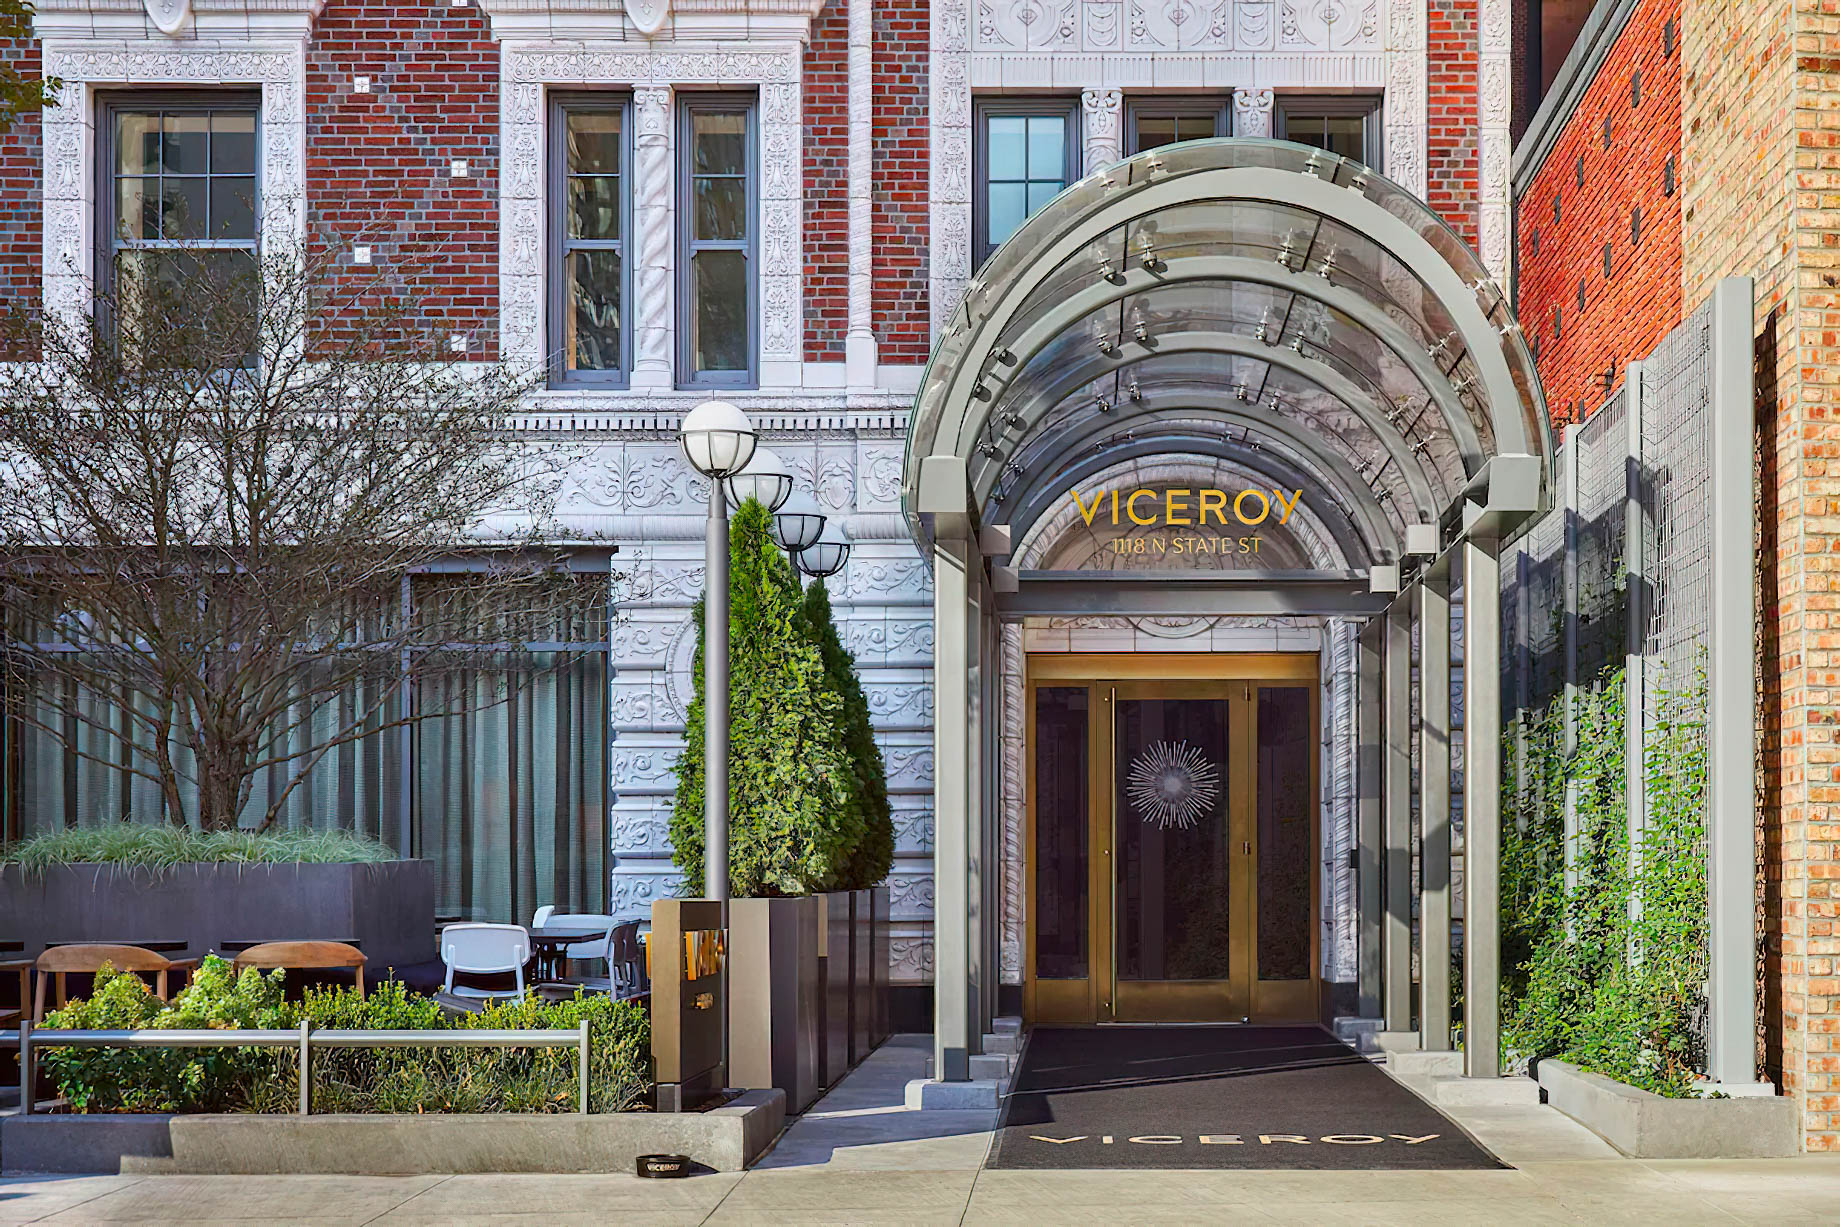 Viceroy Chicago Hotel – Chicago, IL, USA – Exterior Entrance